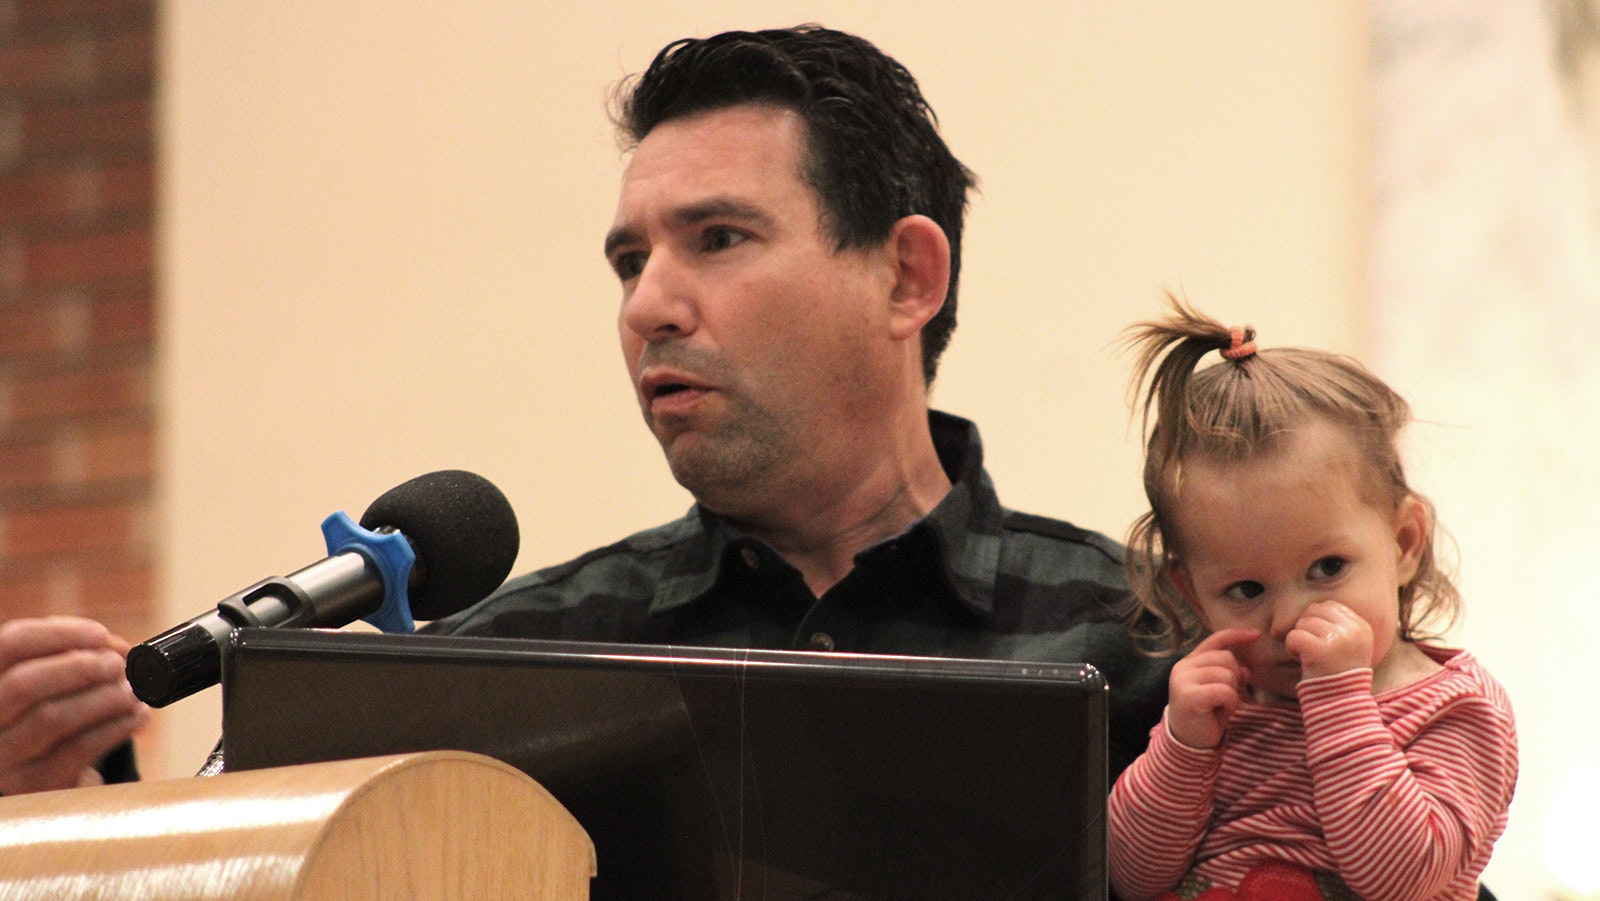 Noam Mantaka, with his young daughter, speaks at a Monday interfaith plea for peace in Cheyenne.